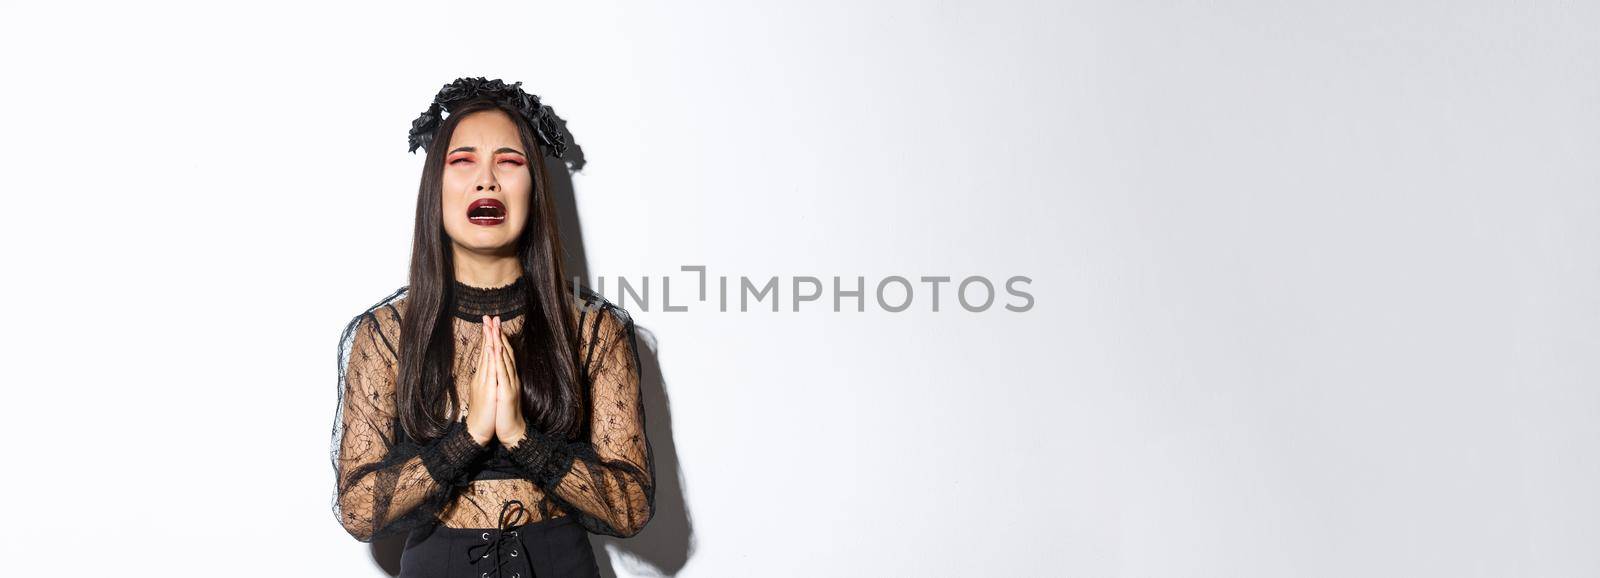 Miserable young asian woman in trouble pleading god, crying and begging for help, wearing halloween gothic dress and wreath, supplicating over white background.